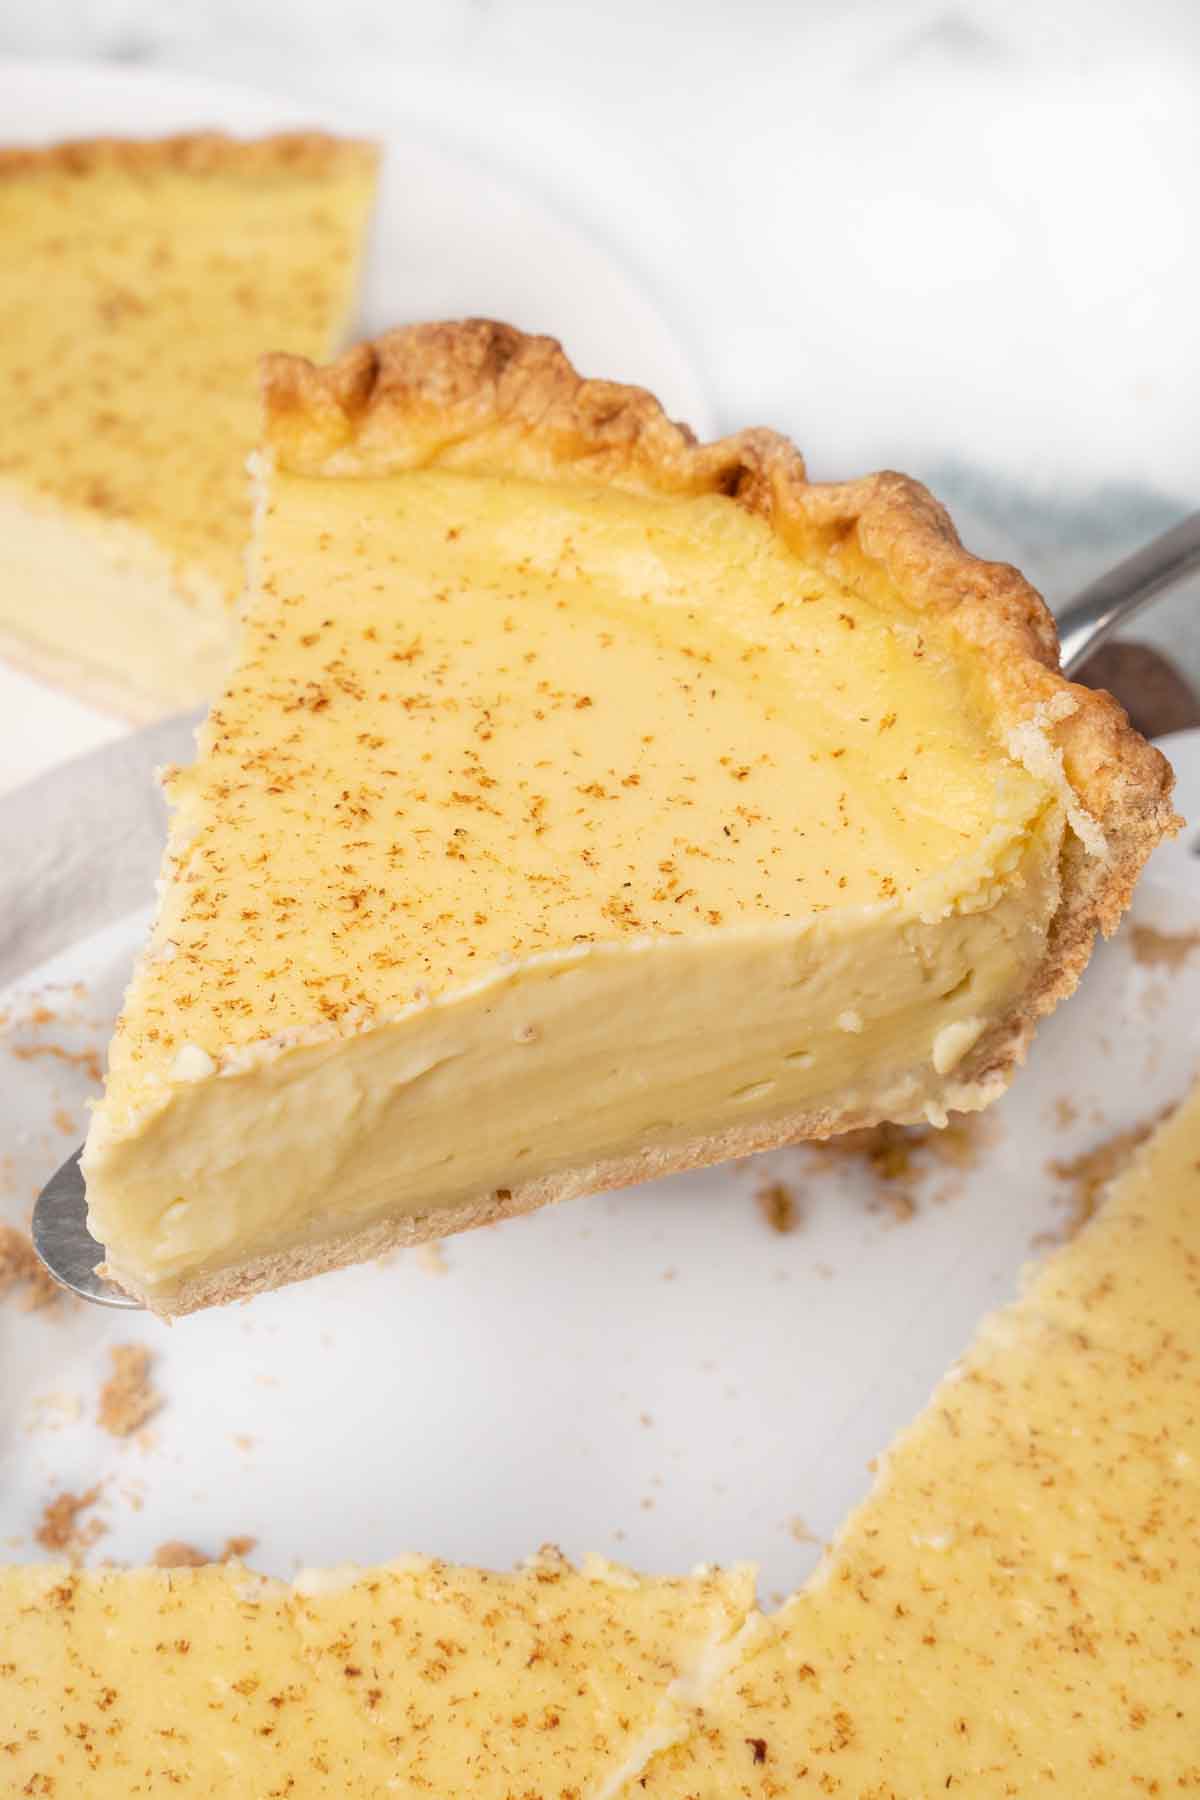 Slice of egg custard pie coming out of whole pie.